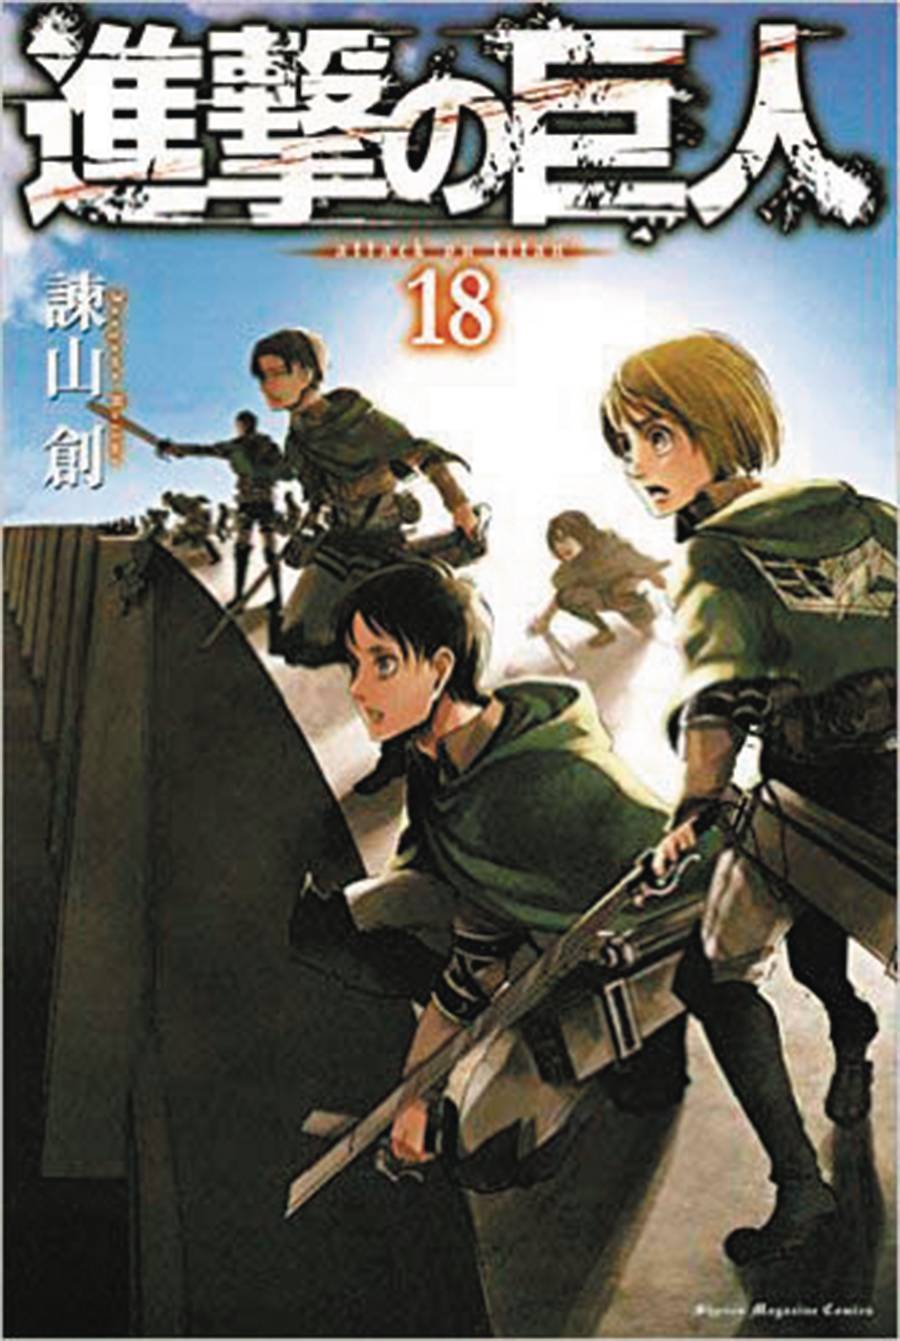 Attack on Titan Manga #18 Special Edition With DVD